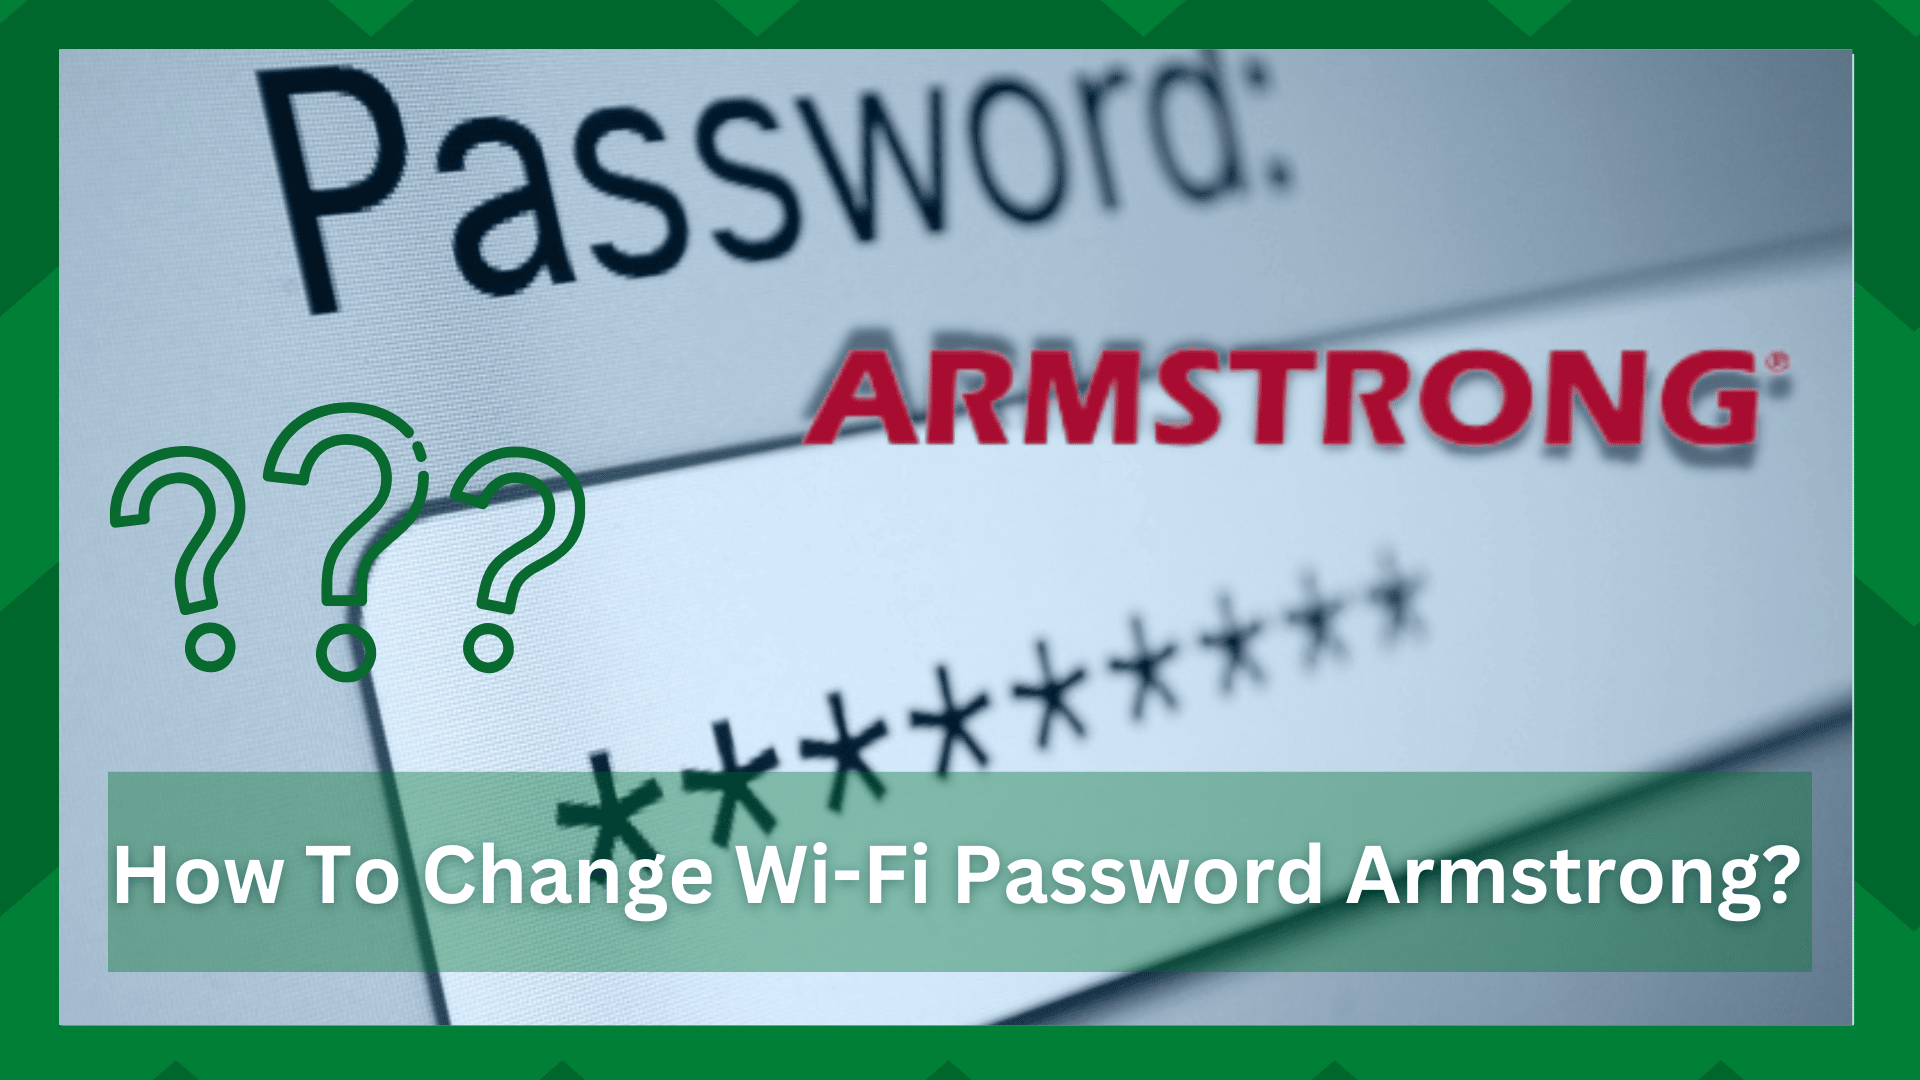 How To Change Wi-Fi Password Armstrong